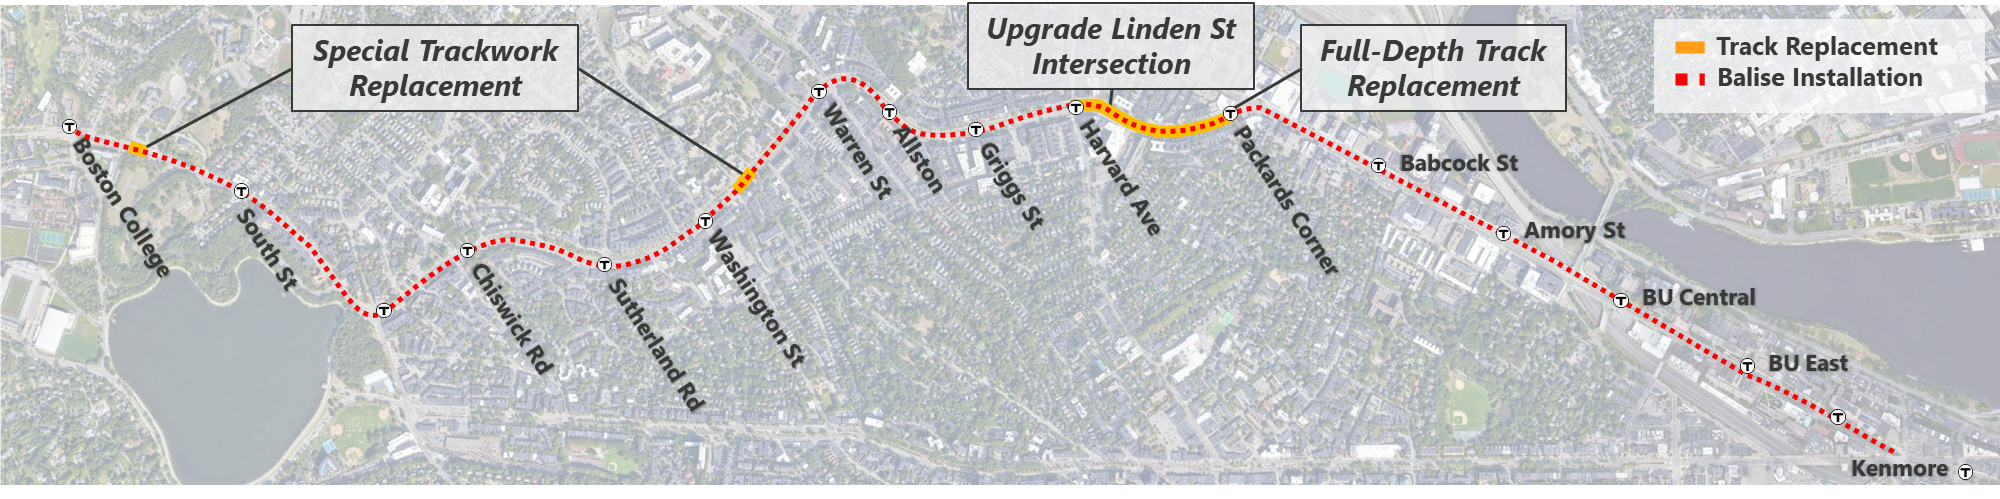 A map showing where special trackwork replacement will happen near Boston College and Washington St; upgraded intersection at Linden St; and full depth track replacement between Harvard Ave and Packards Corner